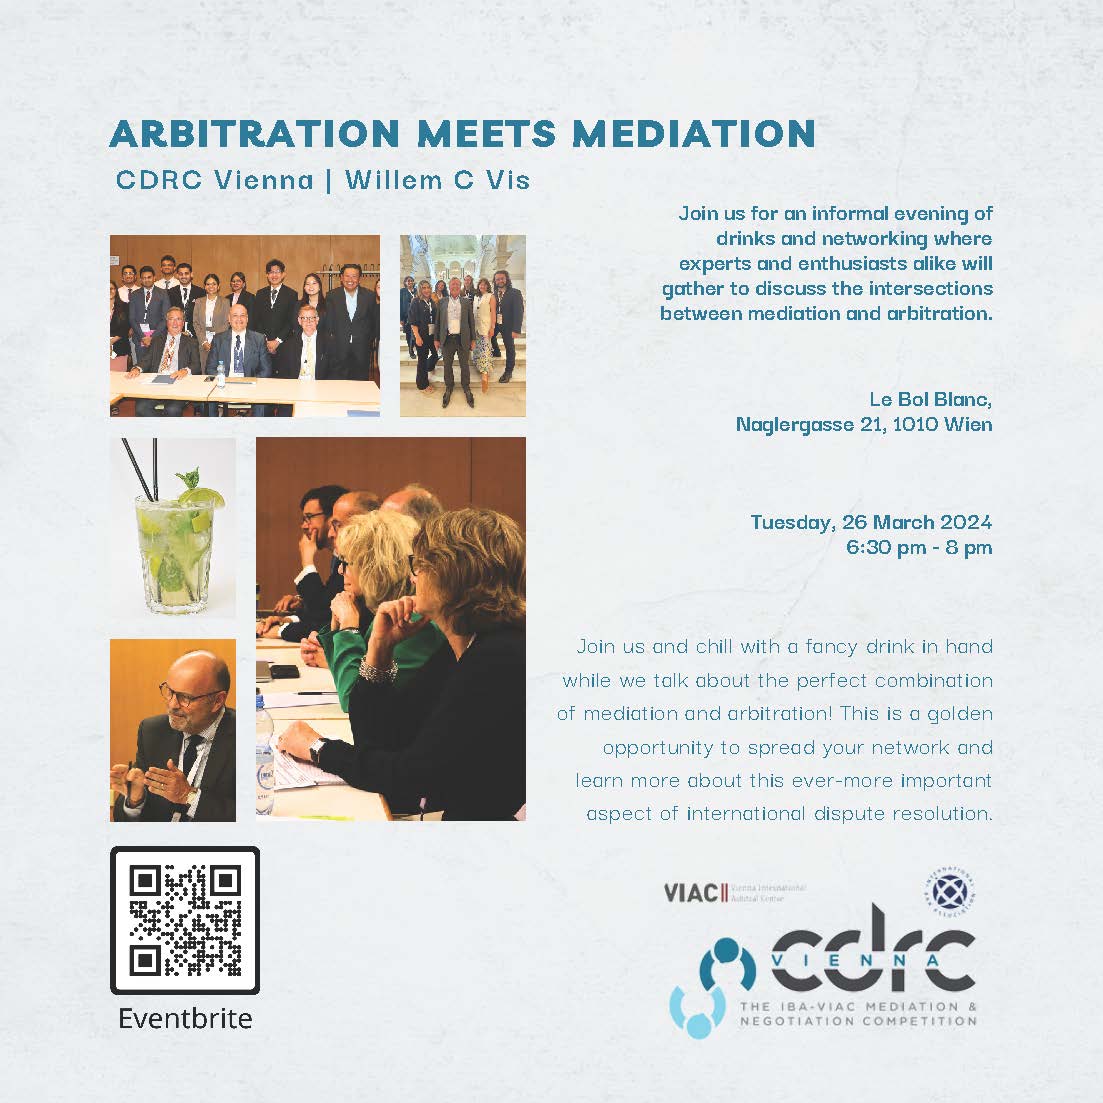 Arbitration meets Mediation - Vis Moot event on 26 March 2024